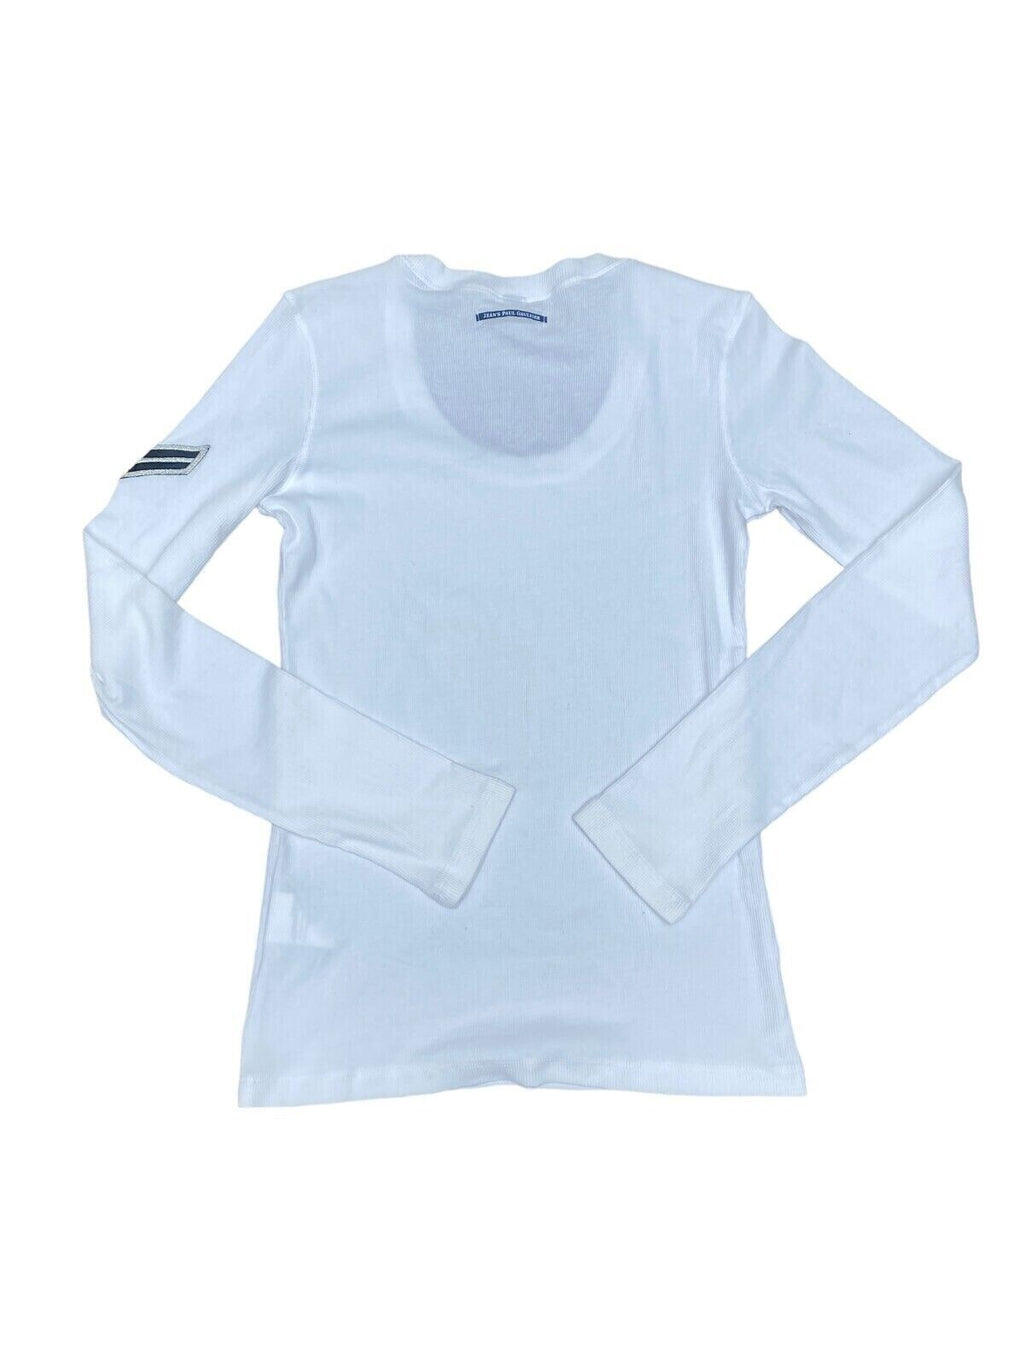 White Ribbed Longsleeves Size XL fits M